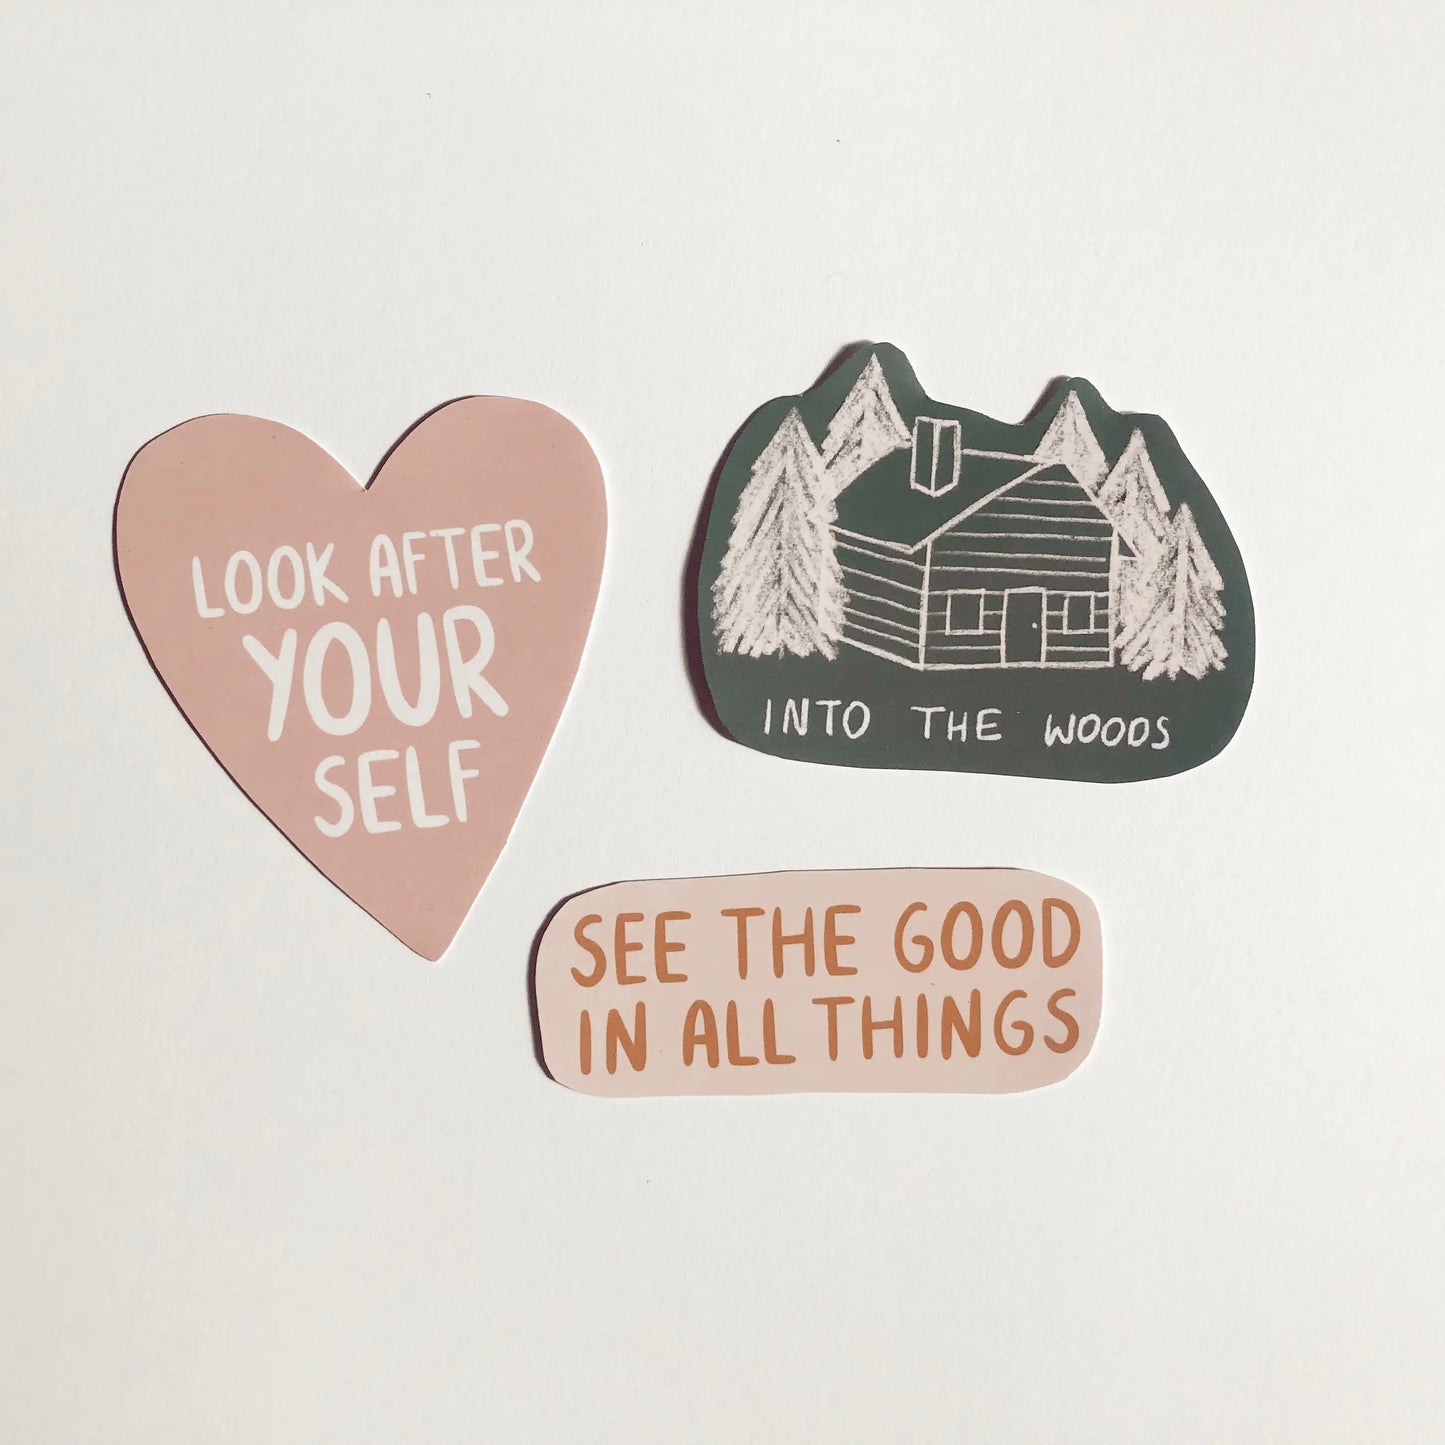 See The Good In All Things Vinyl Sticker